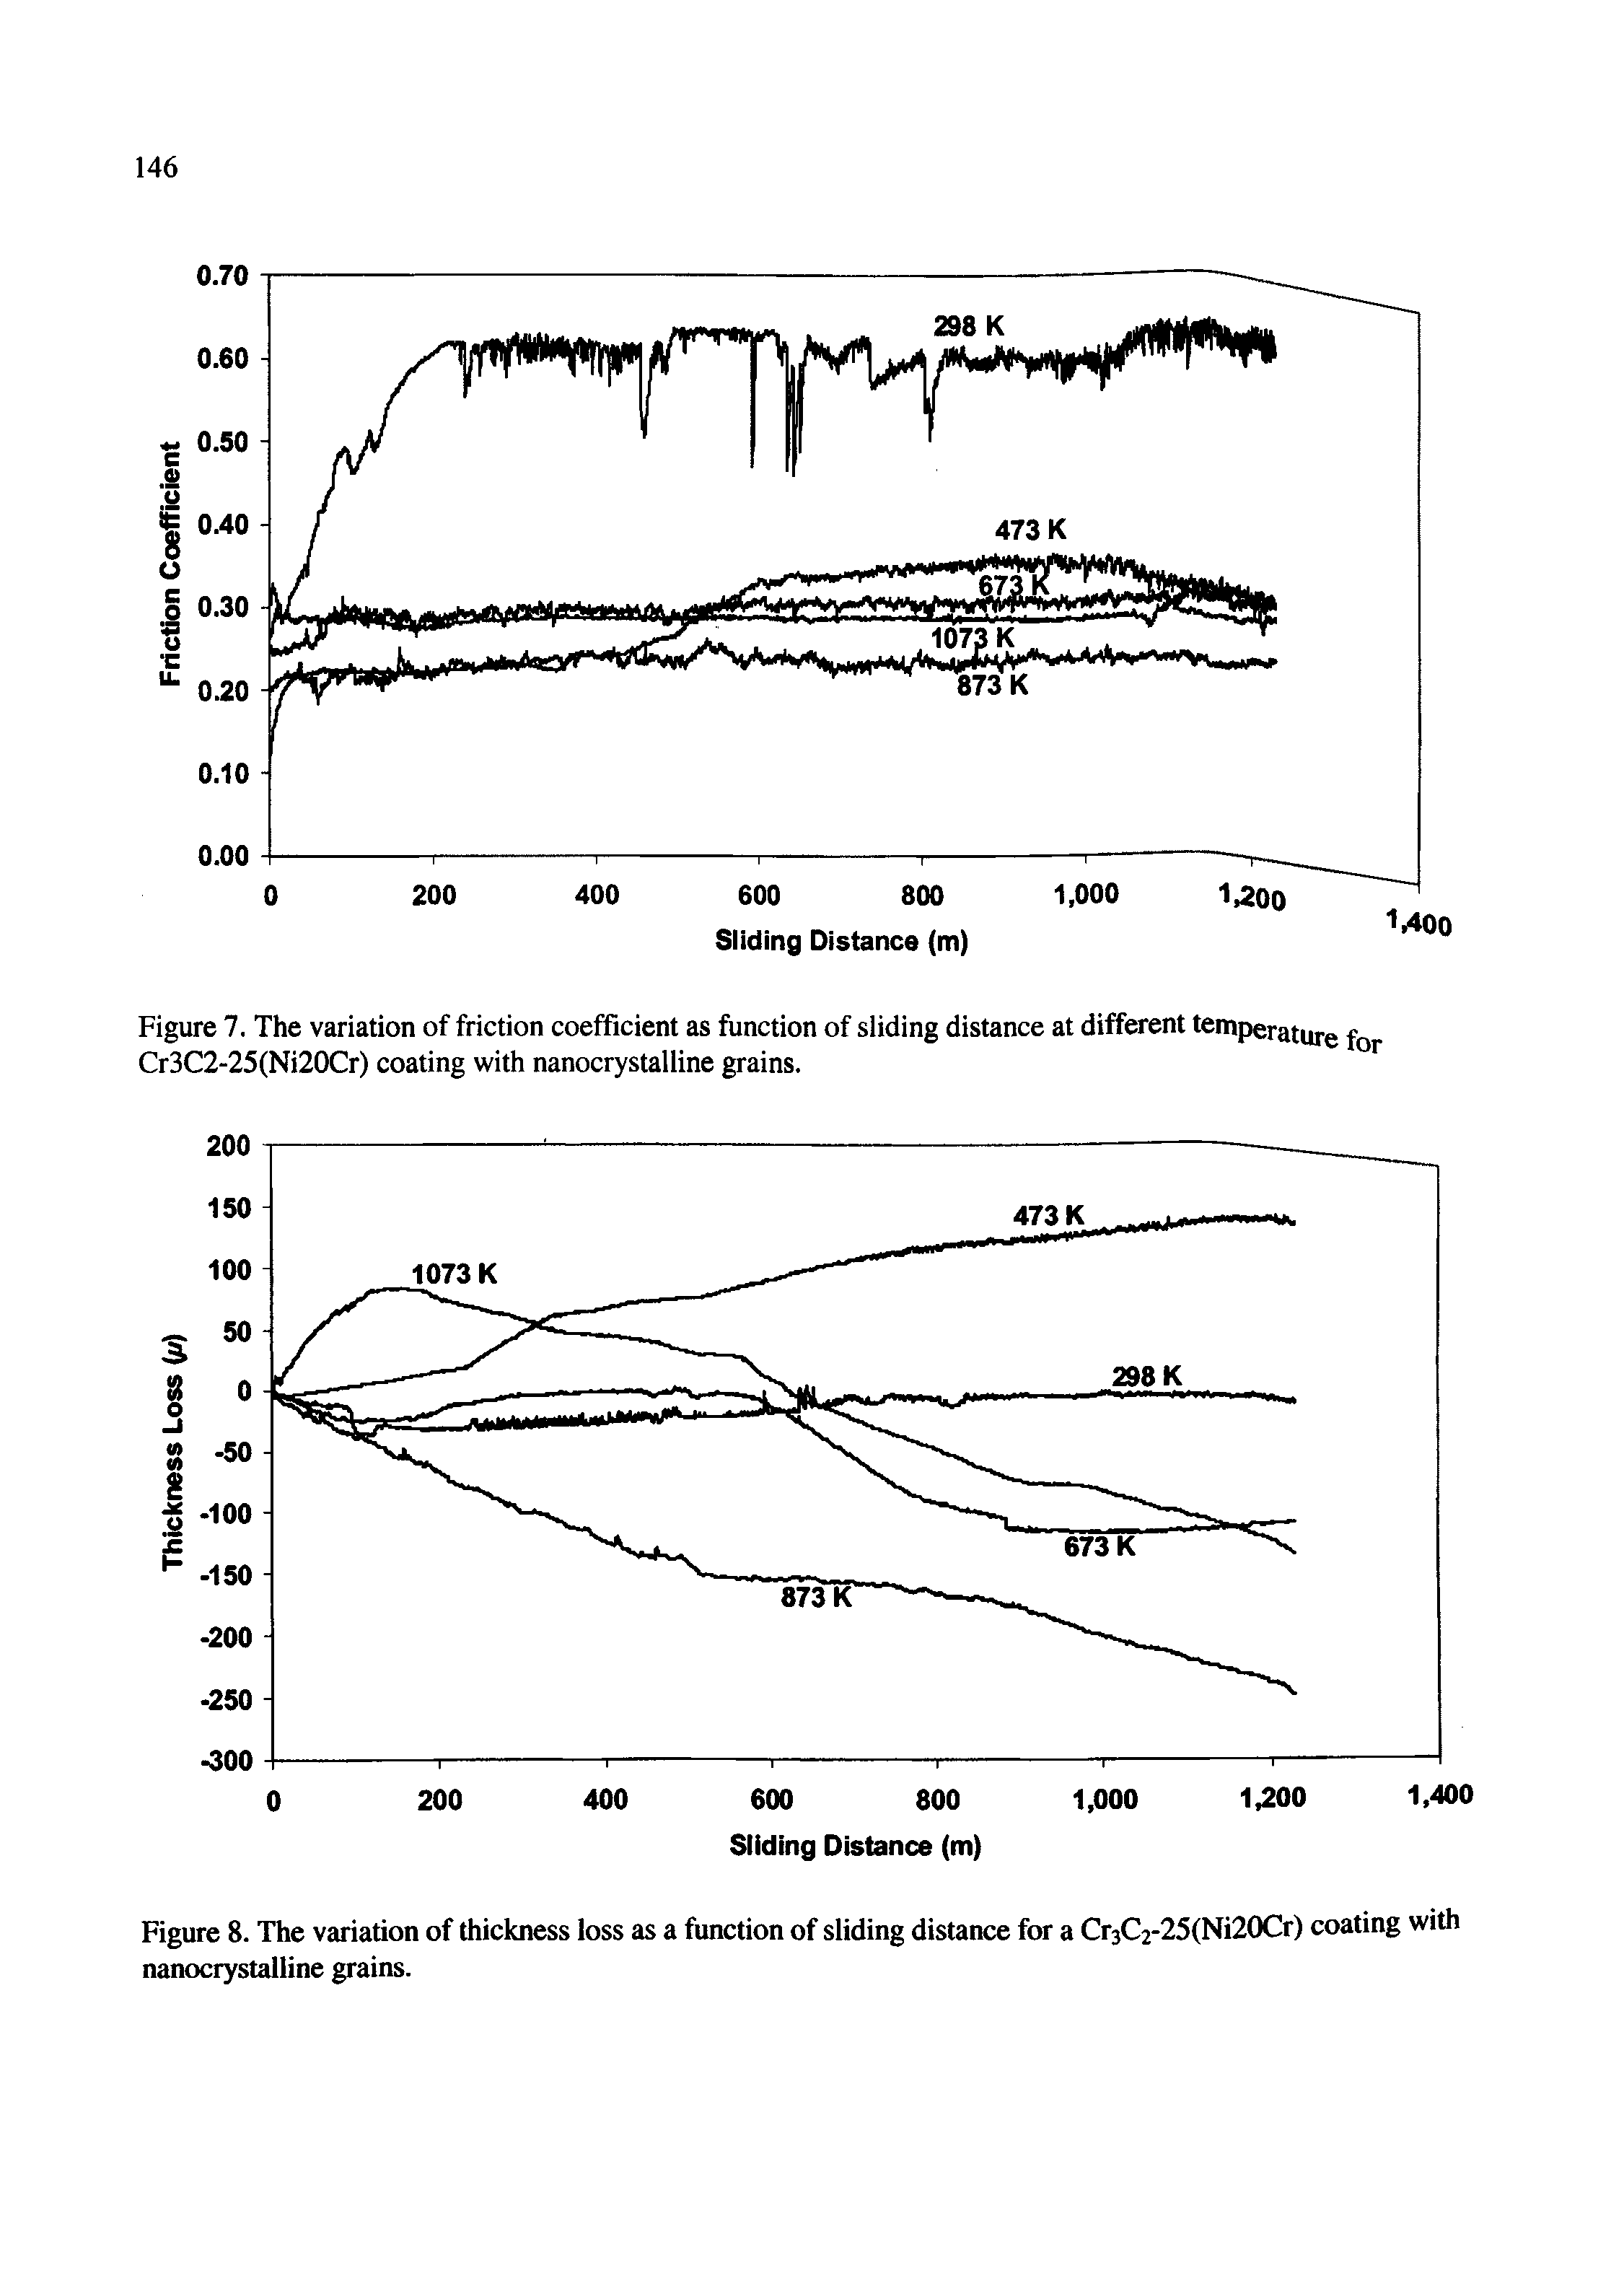 Figure 8. The variation of thickness loss as a function of sliding distance for a Cr3C2-25(Ni20Cr) coating with nanocrystalline grains.